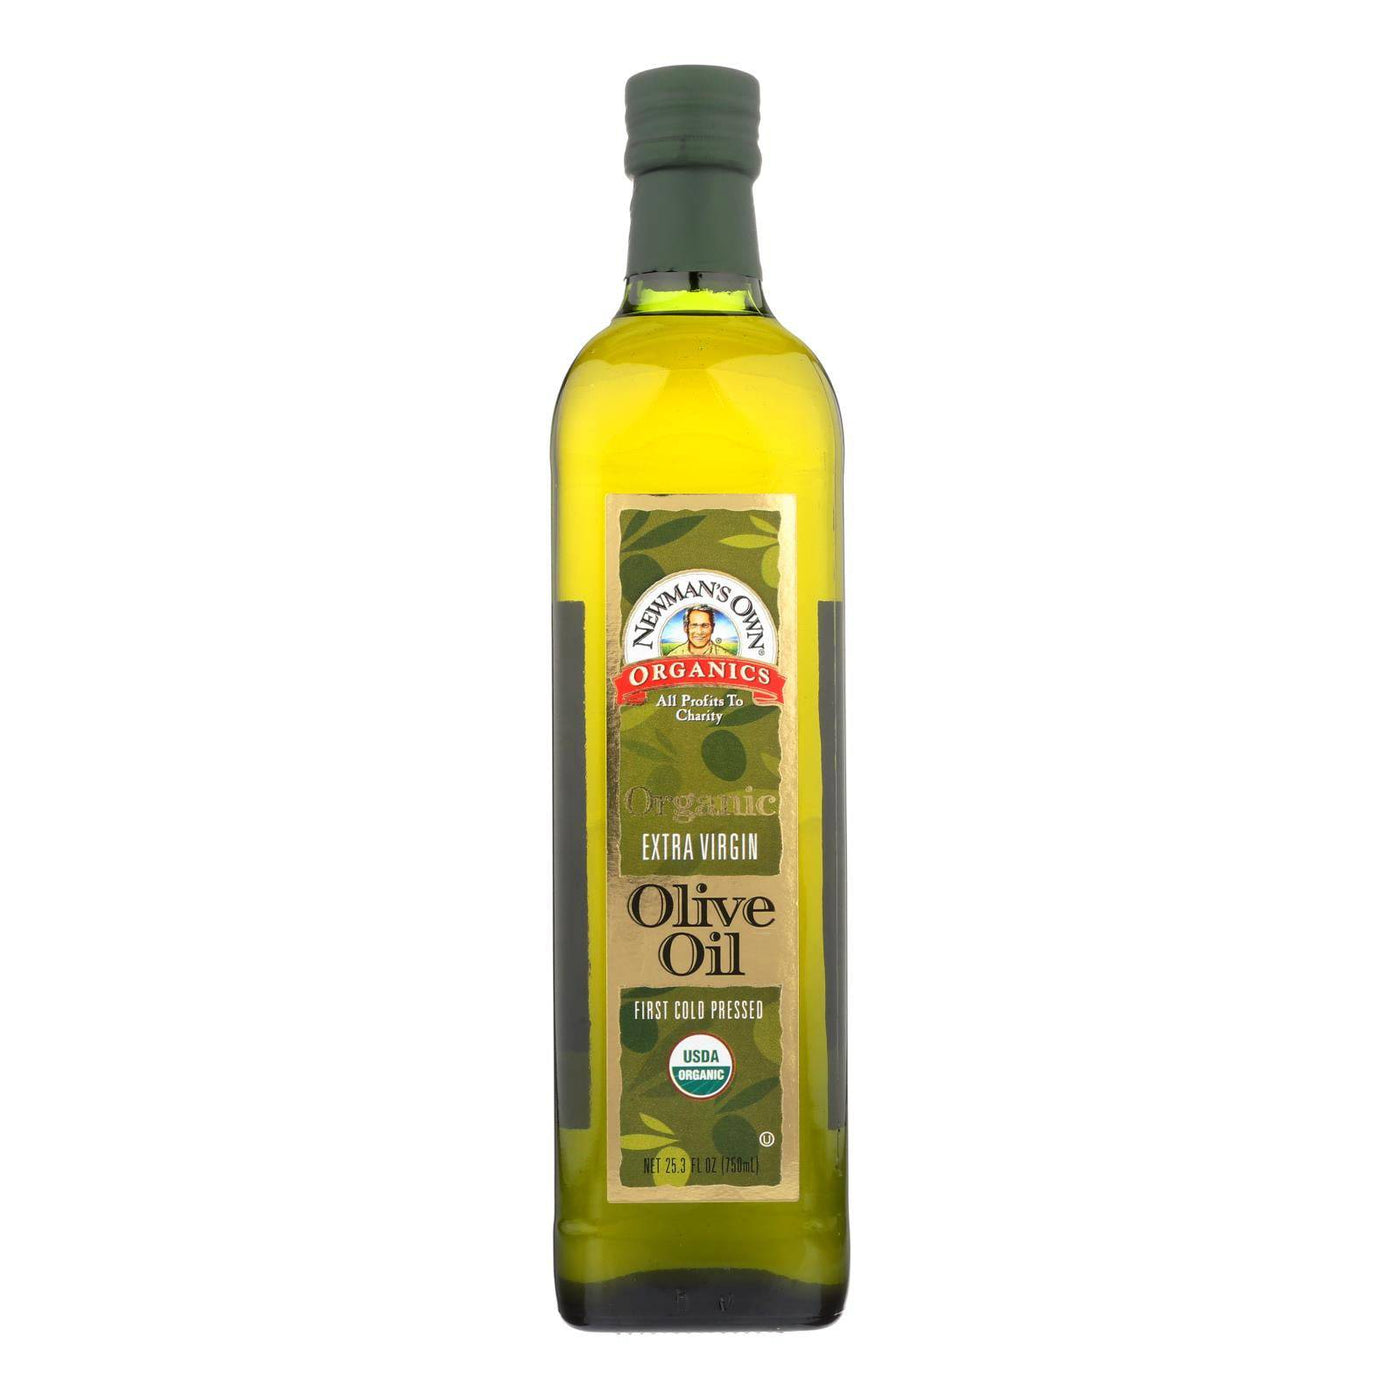 Buy Newman's Own Organics Extra Virgin Olive Oil - Case Of 6 - 25.3 Fl Oz.  at OnlyNaturals.us